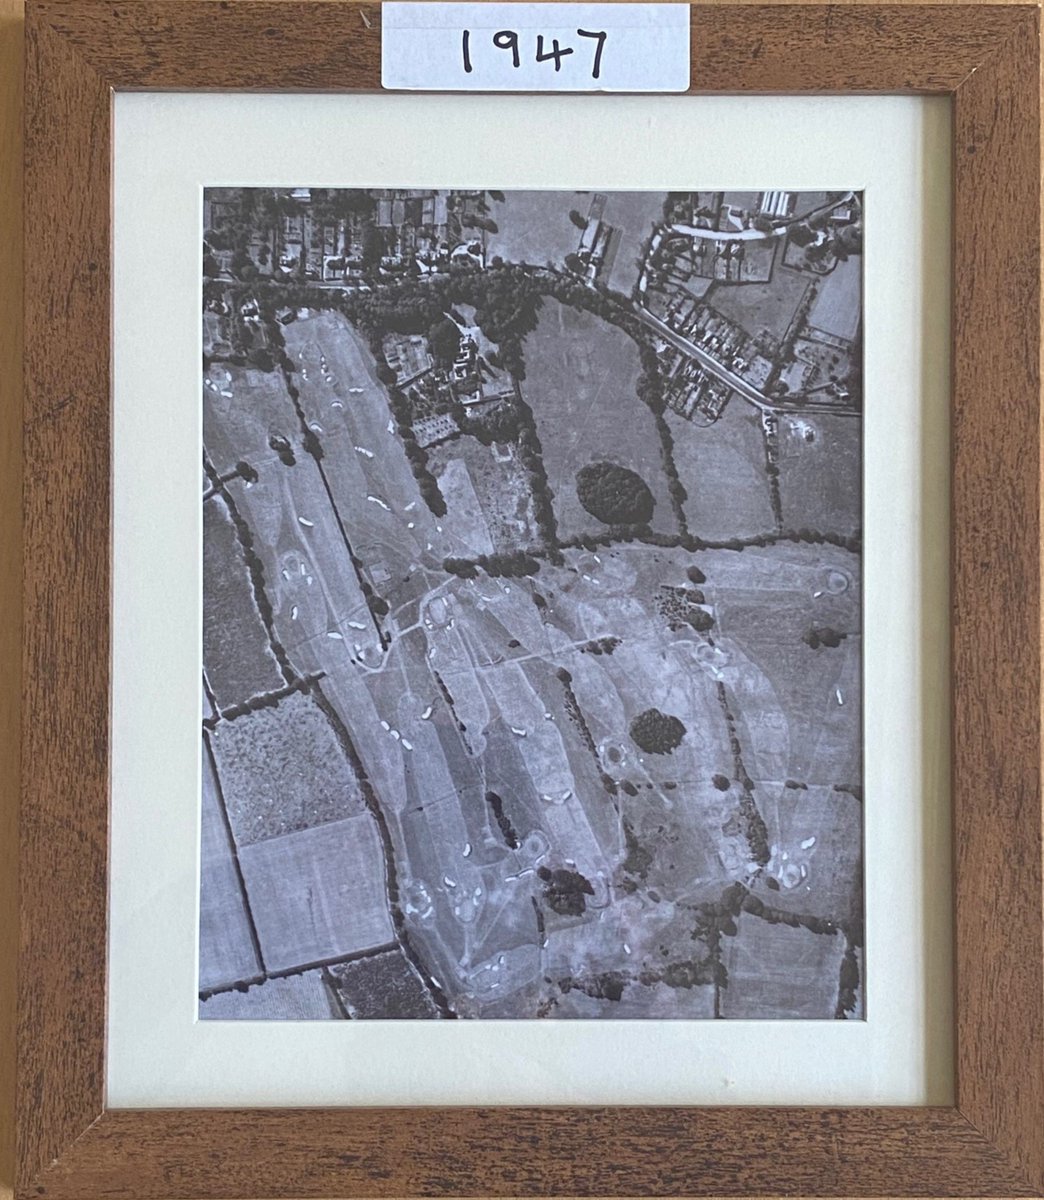 Some fantastic historical aerial photos of the course from 1947, 1950 and 1970 showing the course in its earlier years after James Braid completed our 18 hole design in 1937 #golf #jamesbraid #jamesbraidgolf